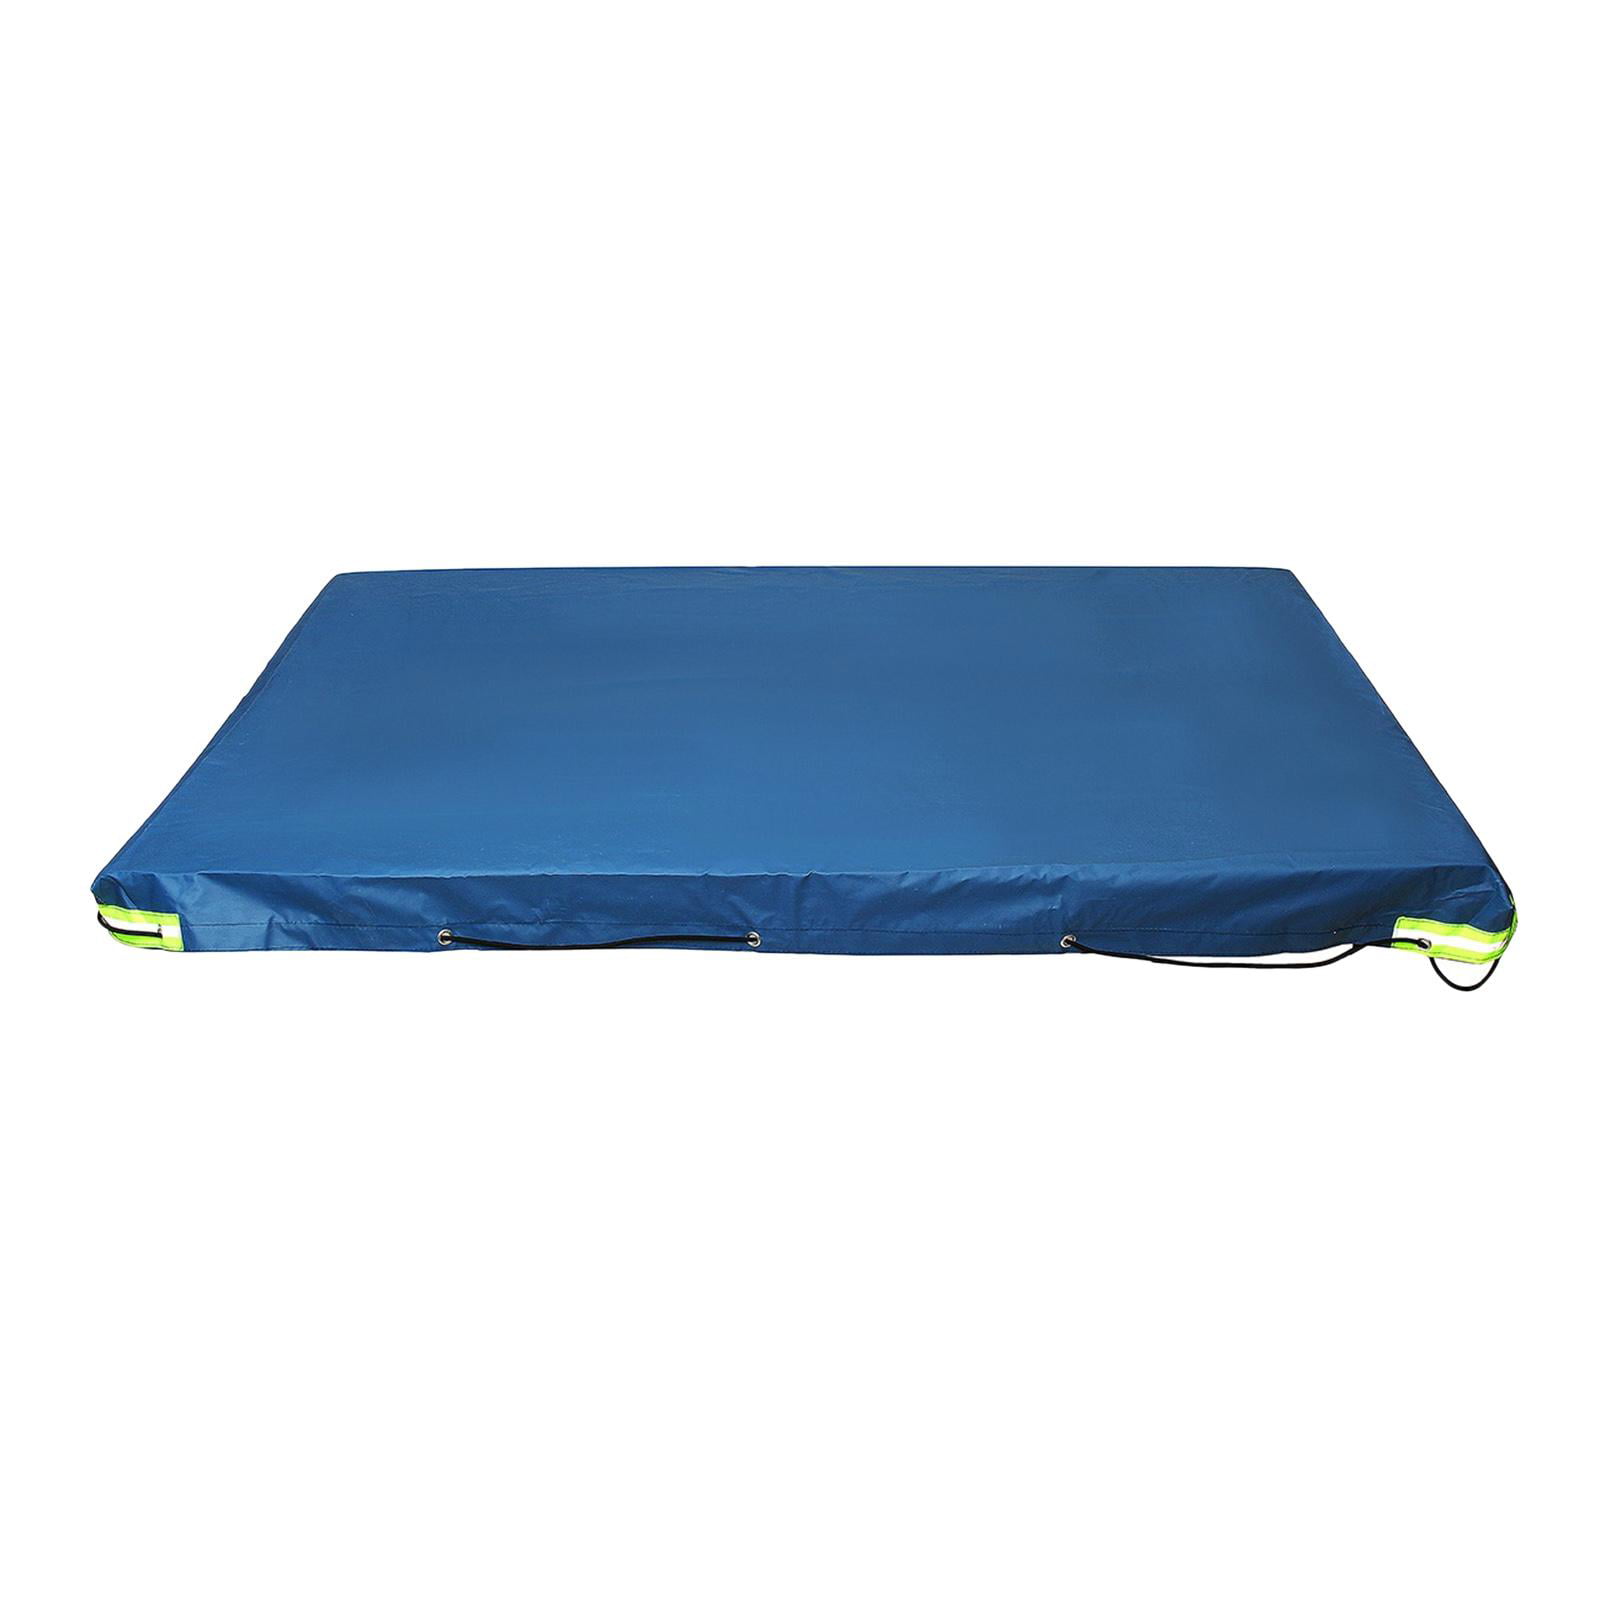 Carry Bag Included 195cm x 130cm Andes 5cm Double Self Inflating Camping Mat/Mattress 